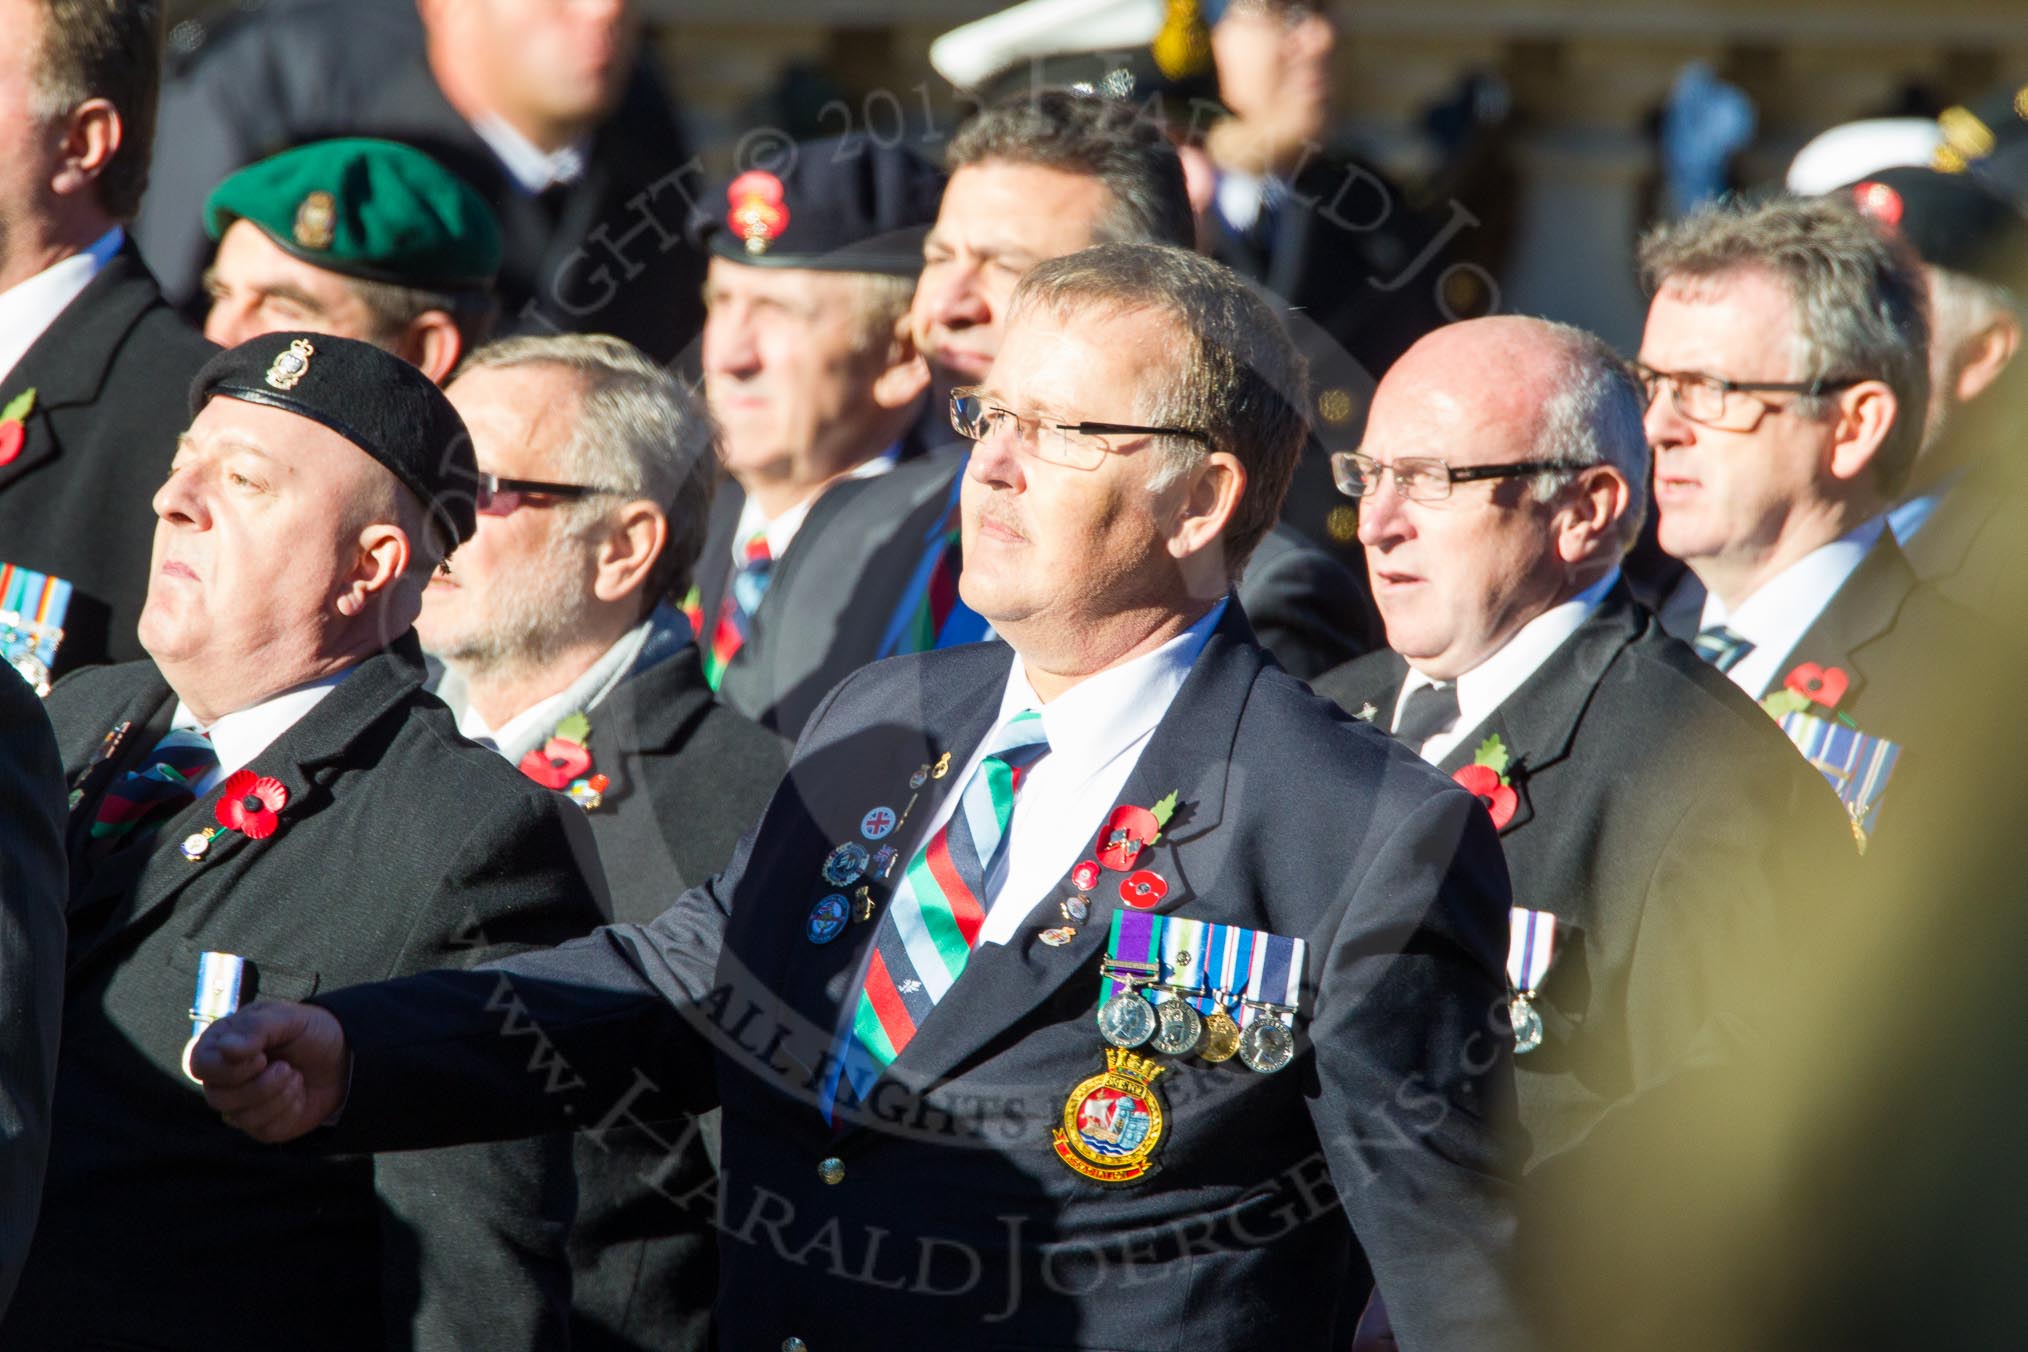 Remembrance Sunday Cenotaph March Past 2013: D23 - South Atlantic Medal Association (SAMA 82): The South Atlantic Medal (1982) is the official name of the medal awarded to almost 30,000 service men and women - and civilians - who took part in the campaign to liberate the Falkland Islands in 1982. The South Atlantic Medal Association is their Association..
Press stand opposite the Foreign Office building, Whitehall, London SW1,
London,
Greater London,
United Kingdom,
on 10 November 2013 at 11:41, image #173